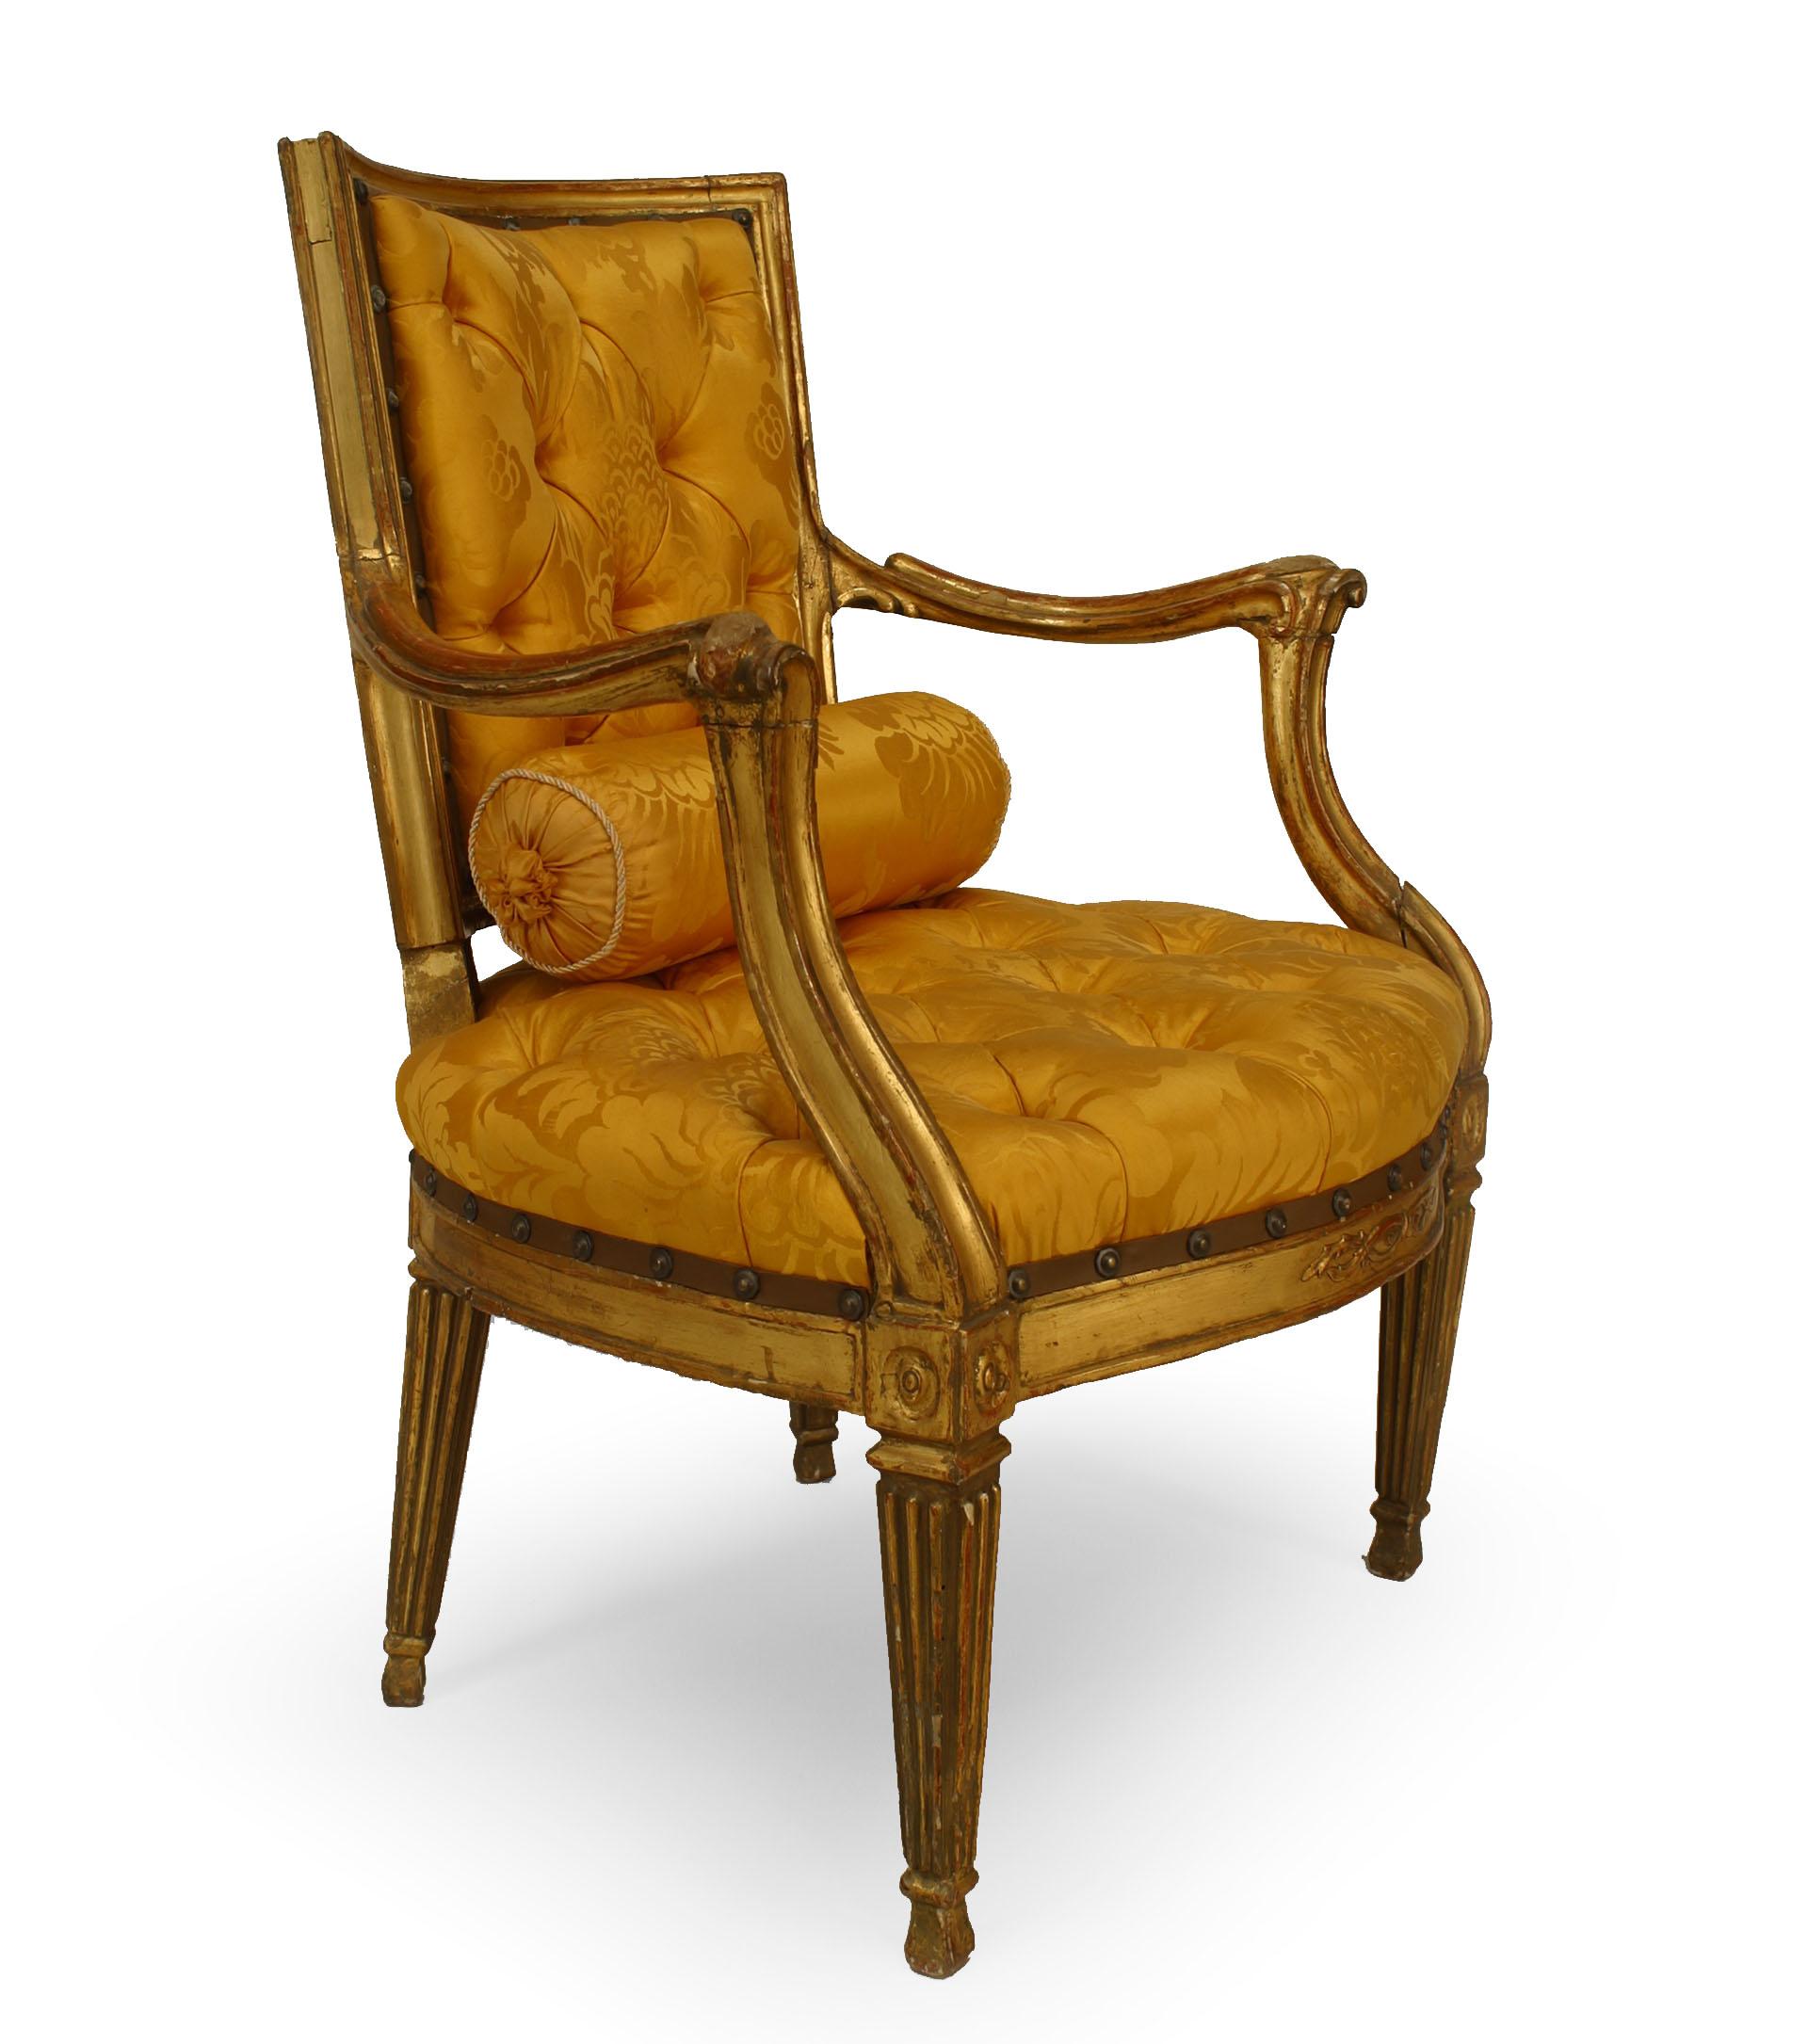 Pair of Italian neoclassic (Neopolitan 18th century) open arm chairs with square fluted tapered legs and carving on back rail with gold upholstered seat and back.